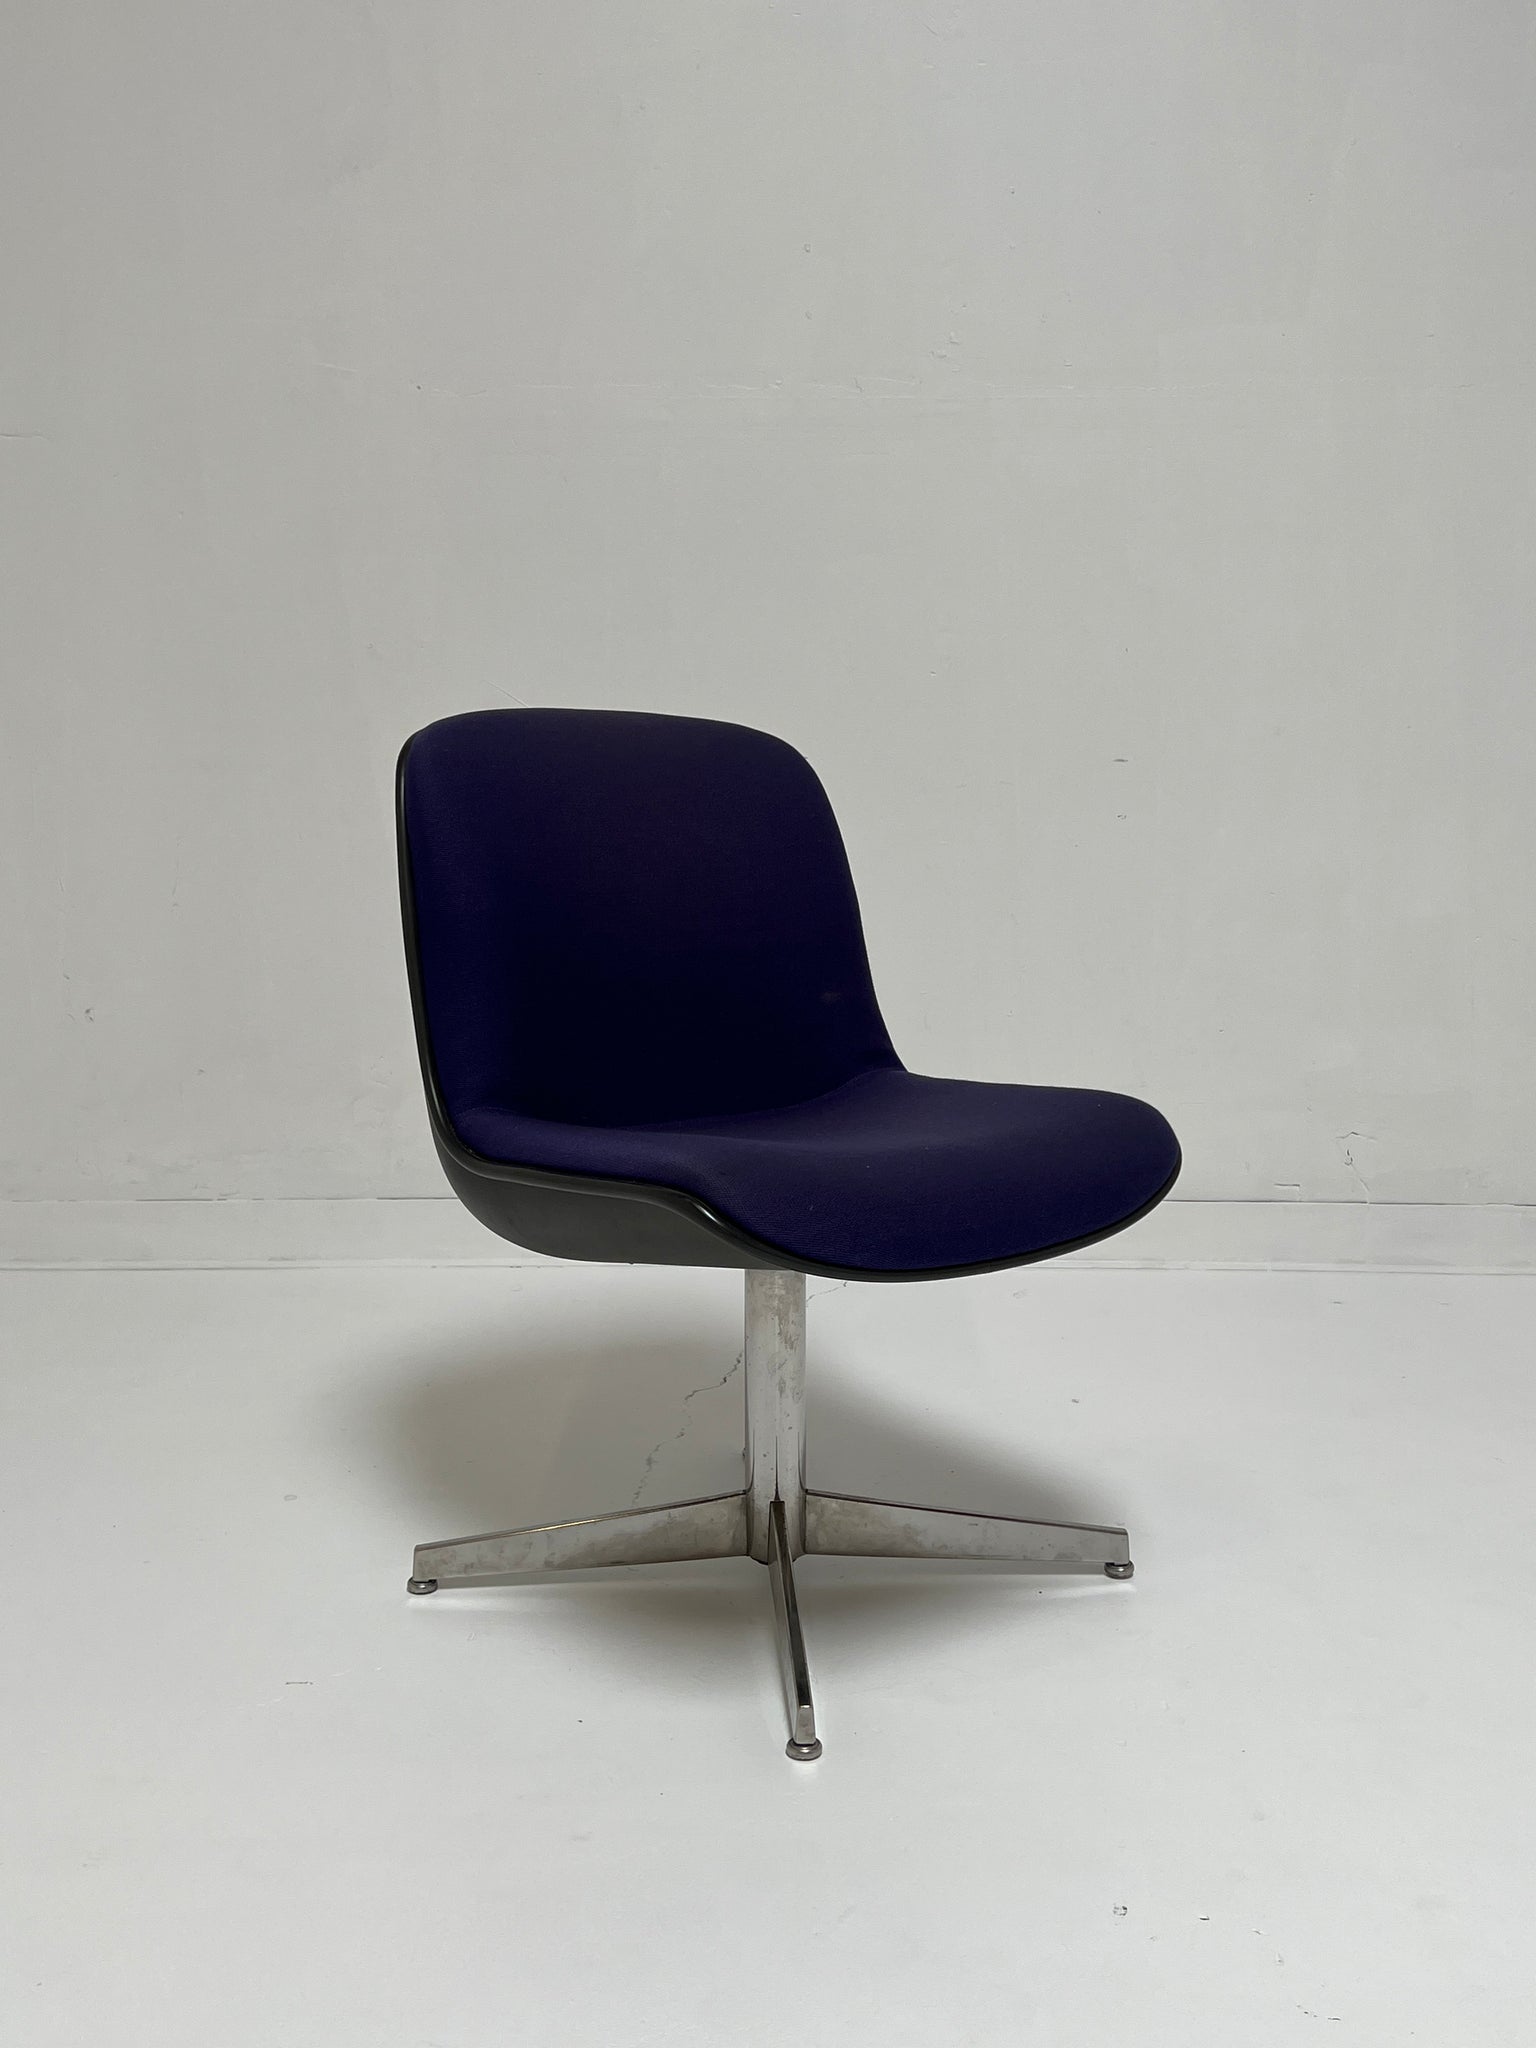 1980s Steelcase Chair